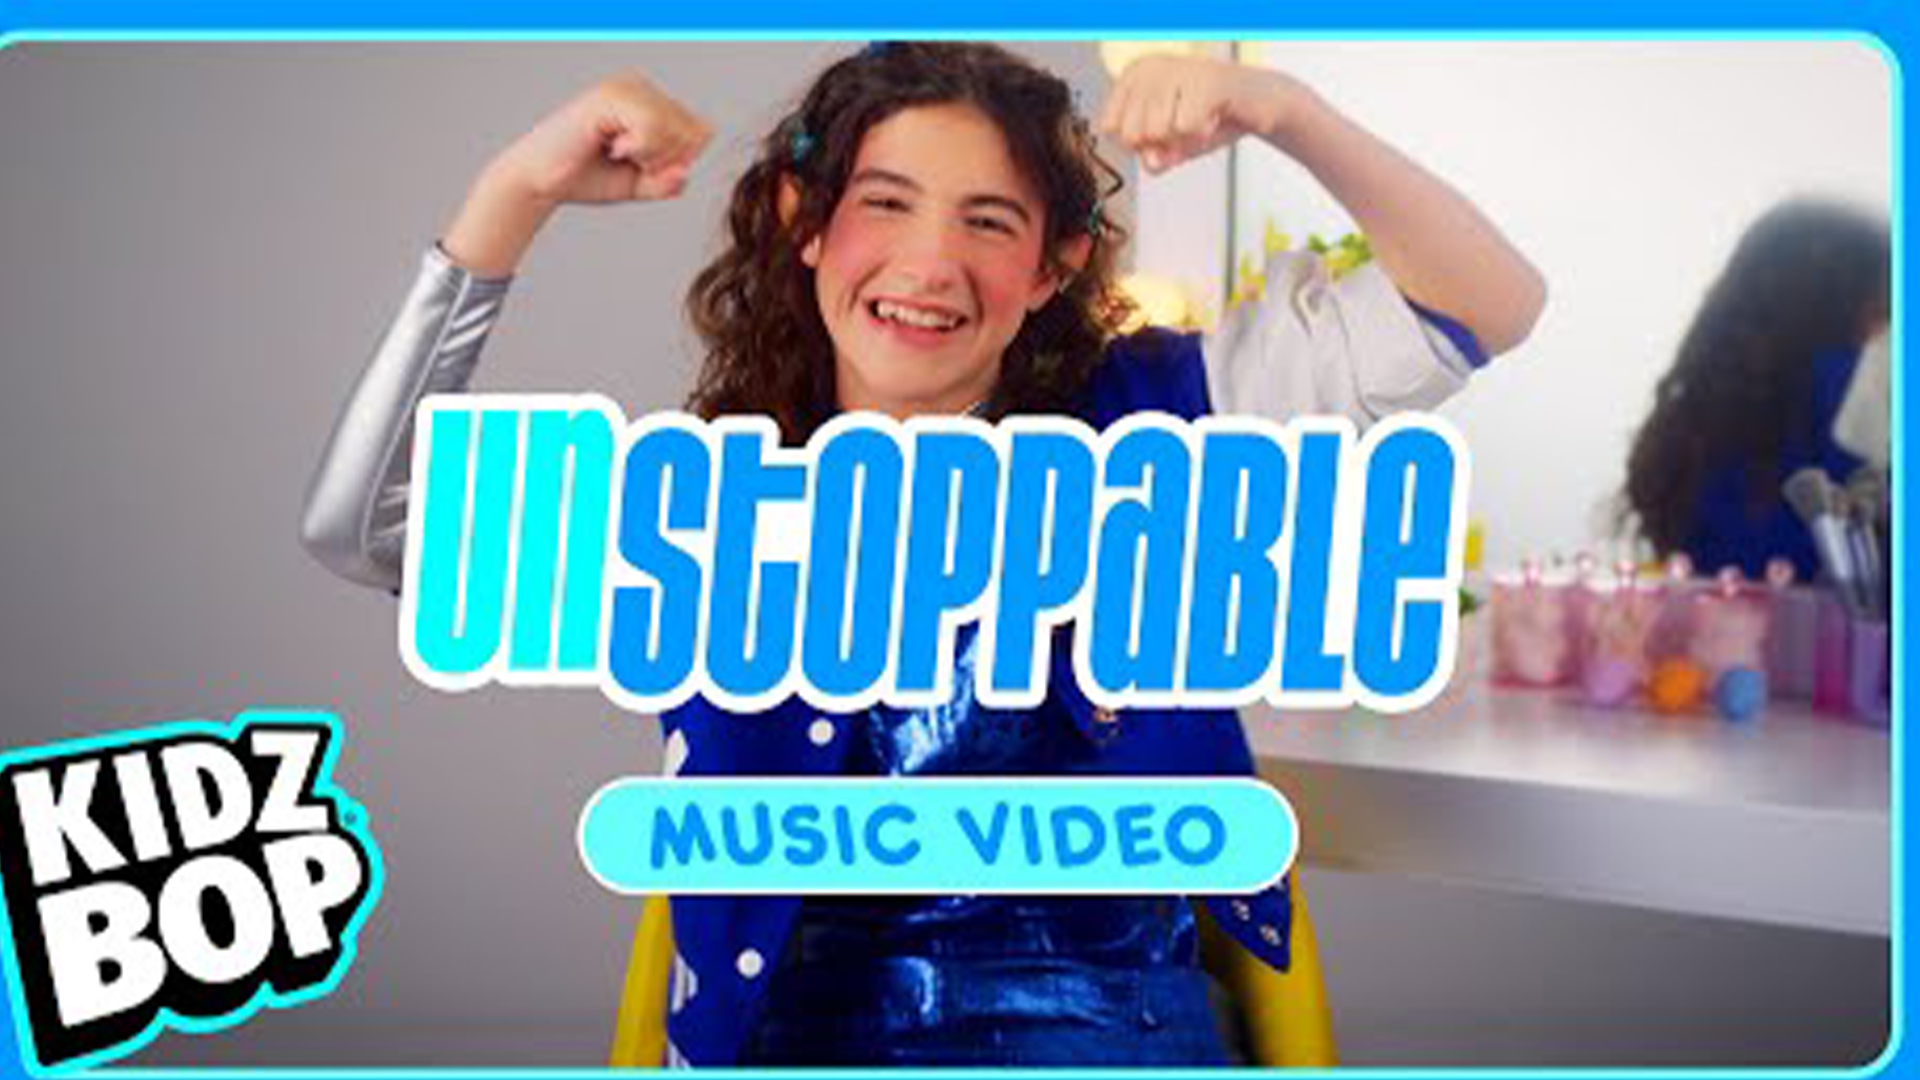 You should watch the Unstoppable video! You're clearly in need of a mood boost, and this will definitely do it!